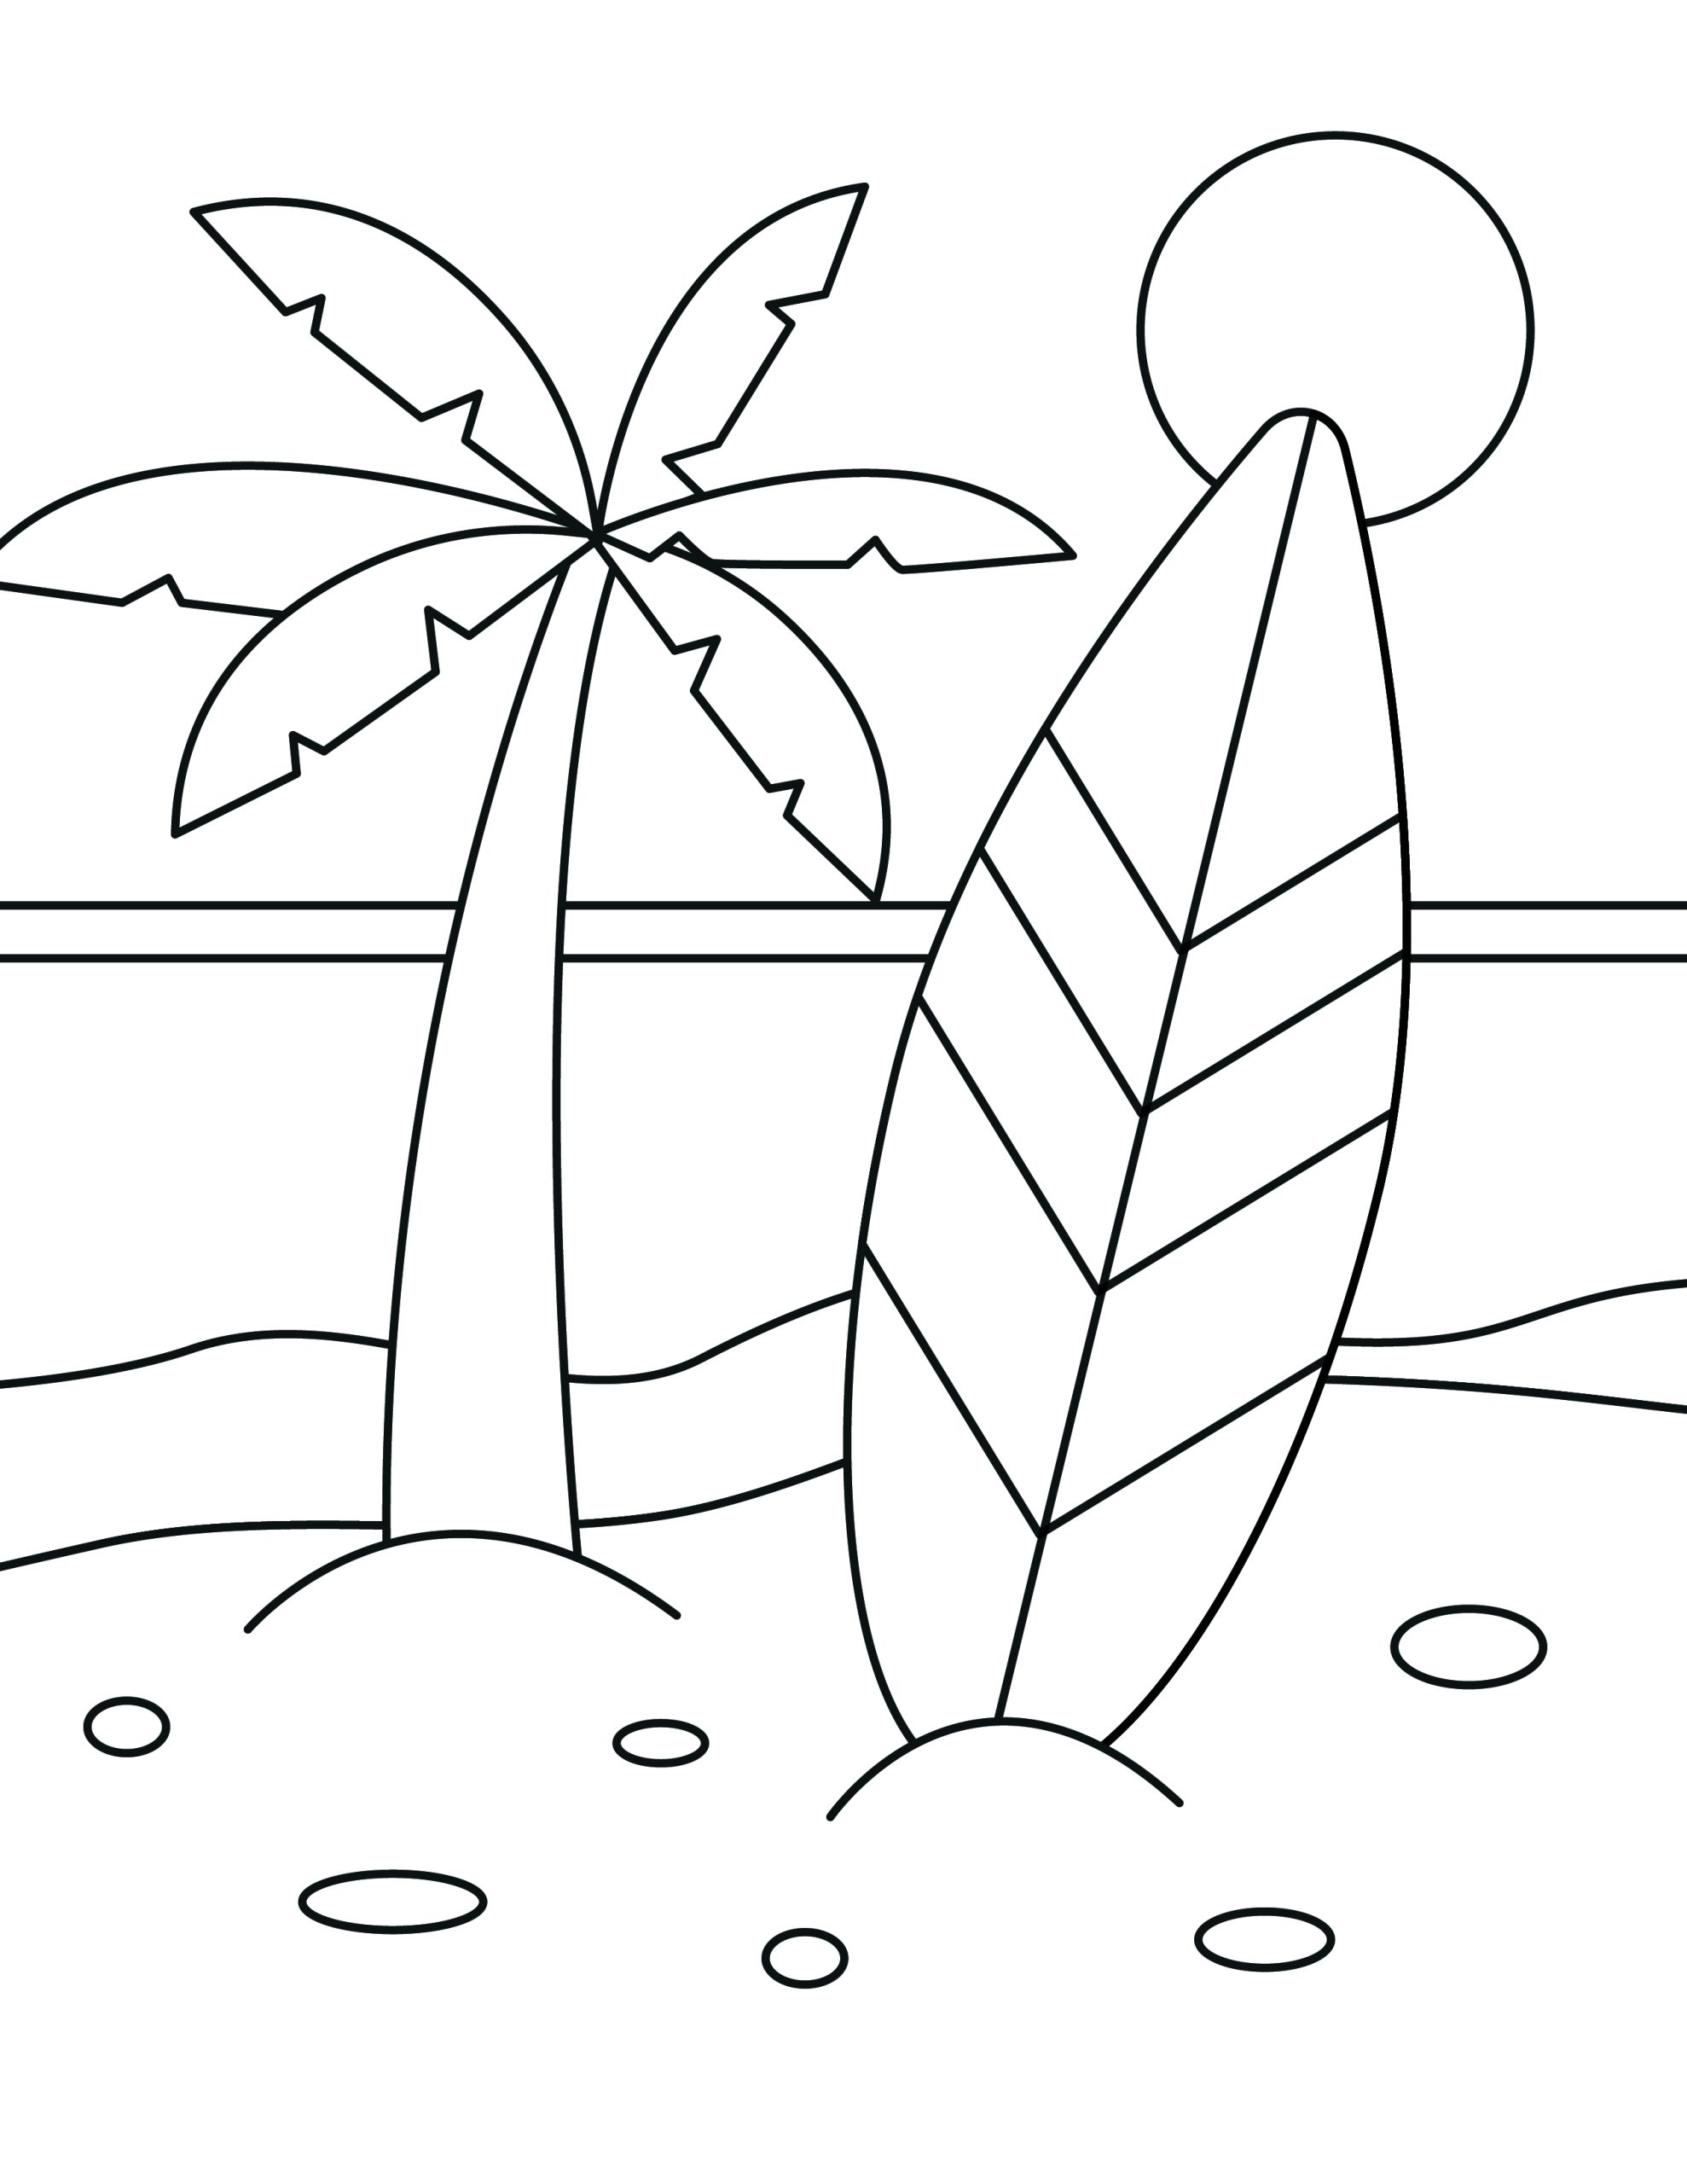 Fun printable beach coloring pages with free download skip to my lou